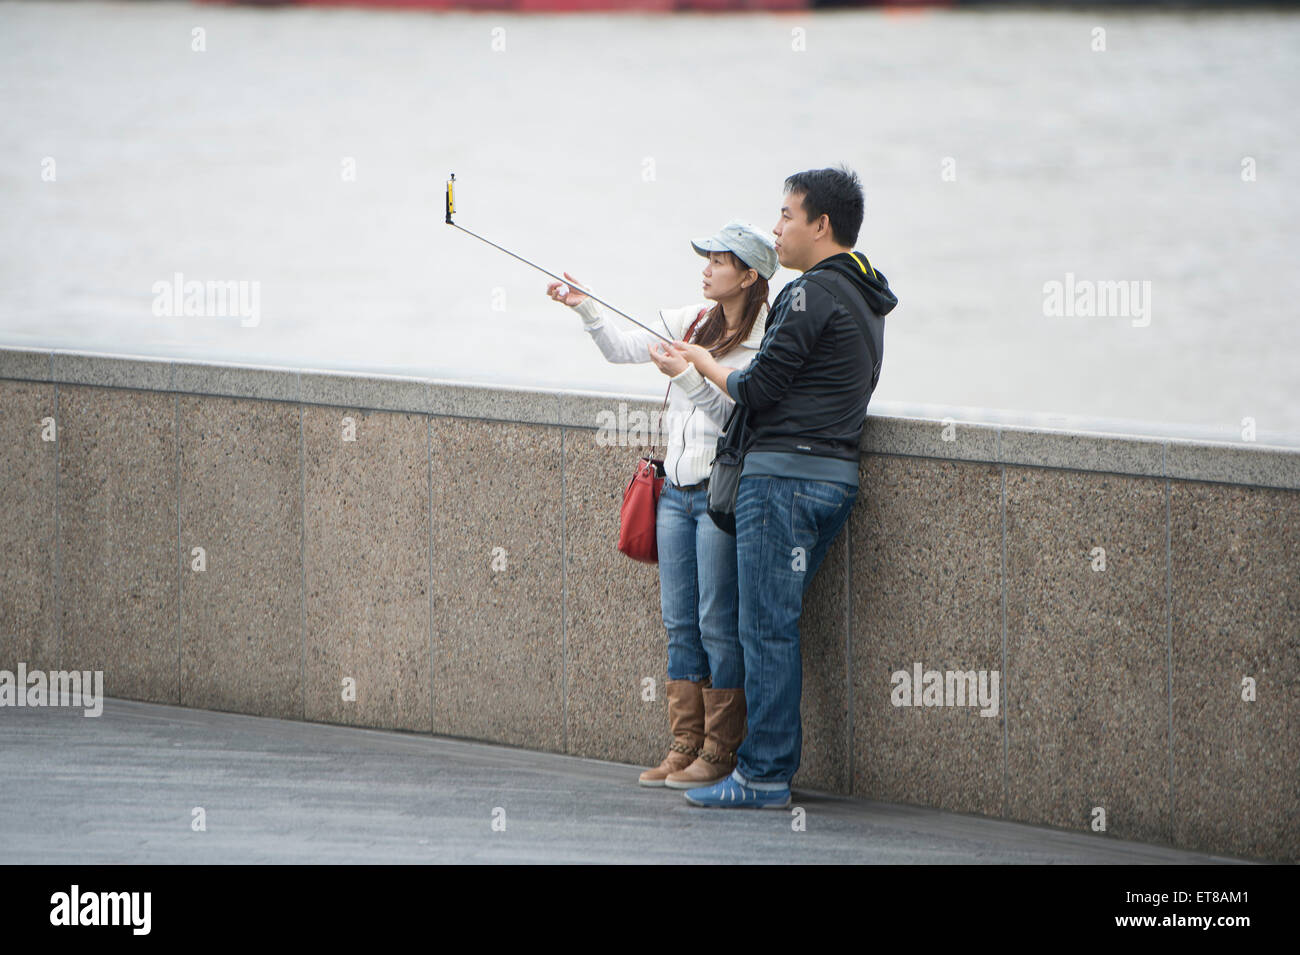 Japanese tourists taking selfie photographs using a selfie stick by the River Thames in London Stock Photo